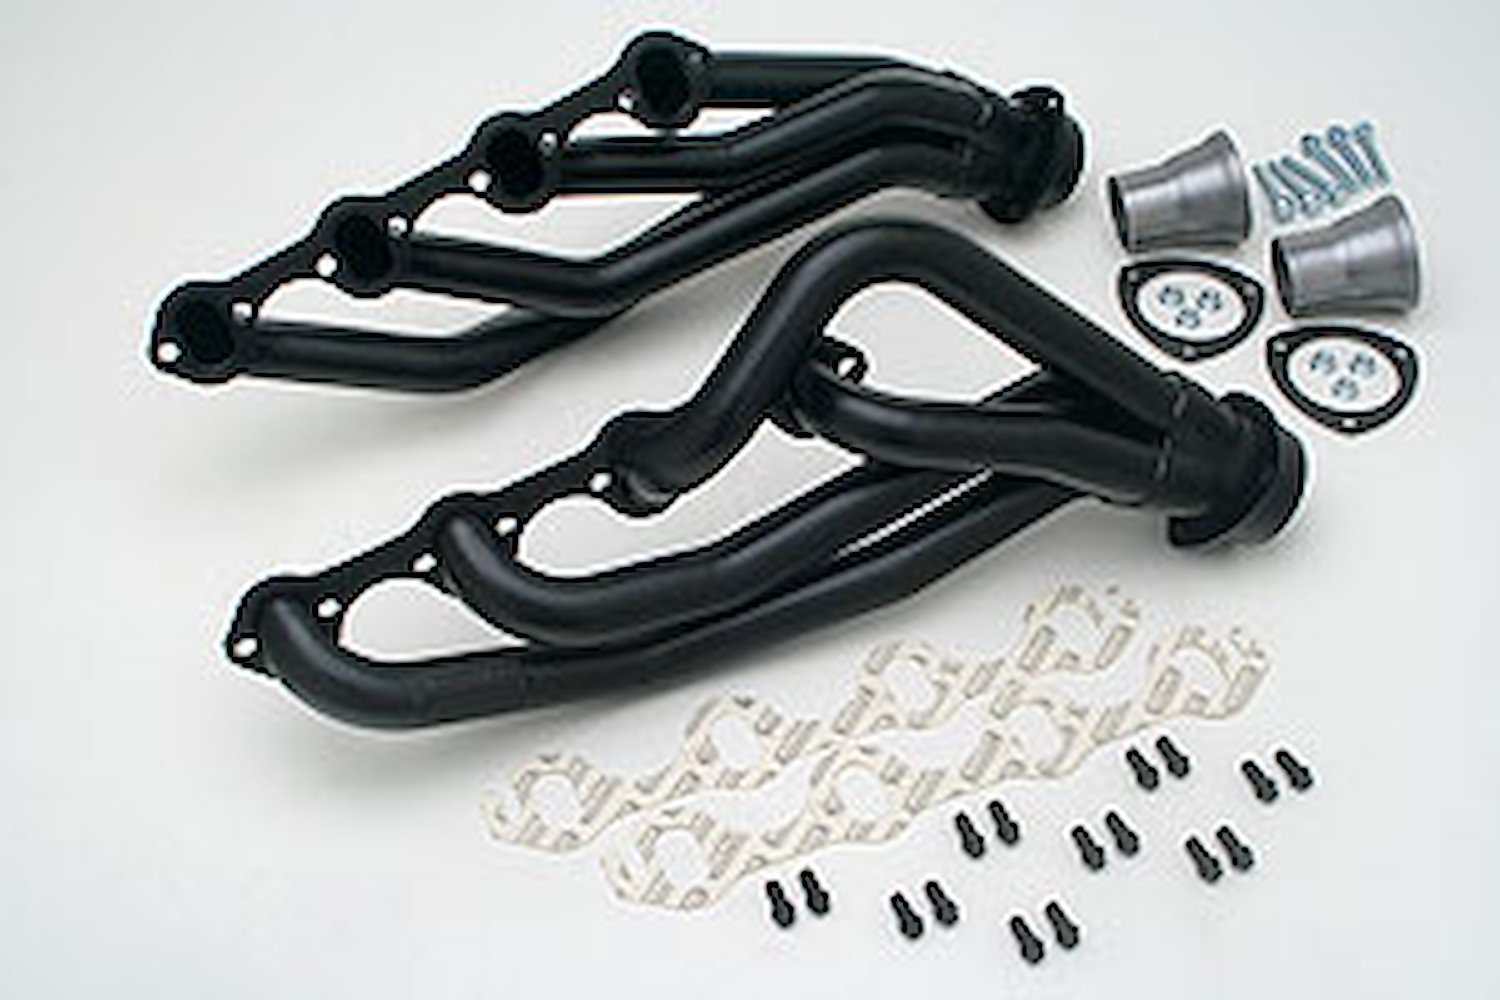 Standard Duty Uncoated Headers for 1964-73 Mustang 351W